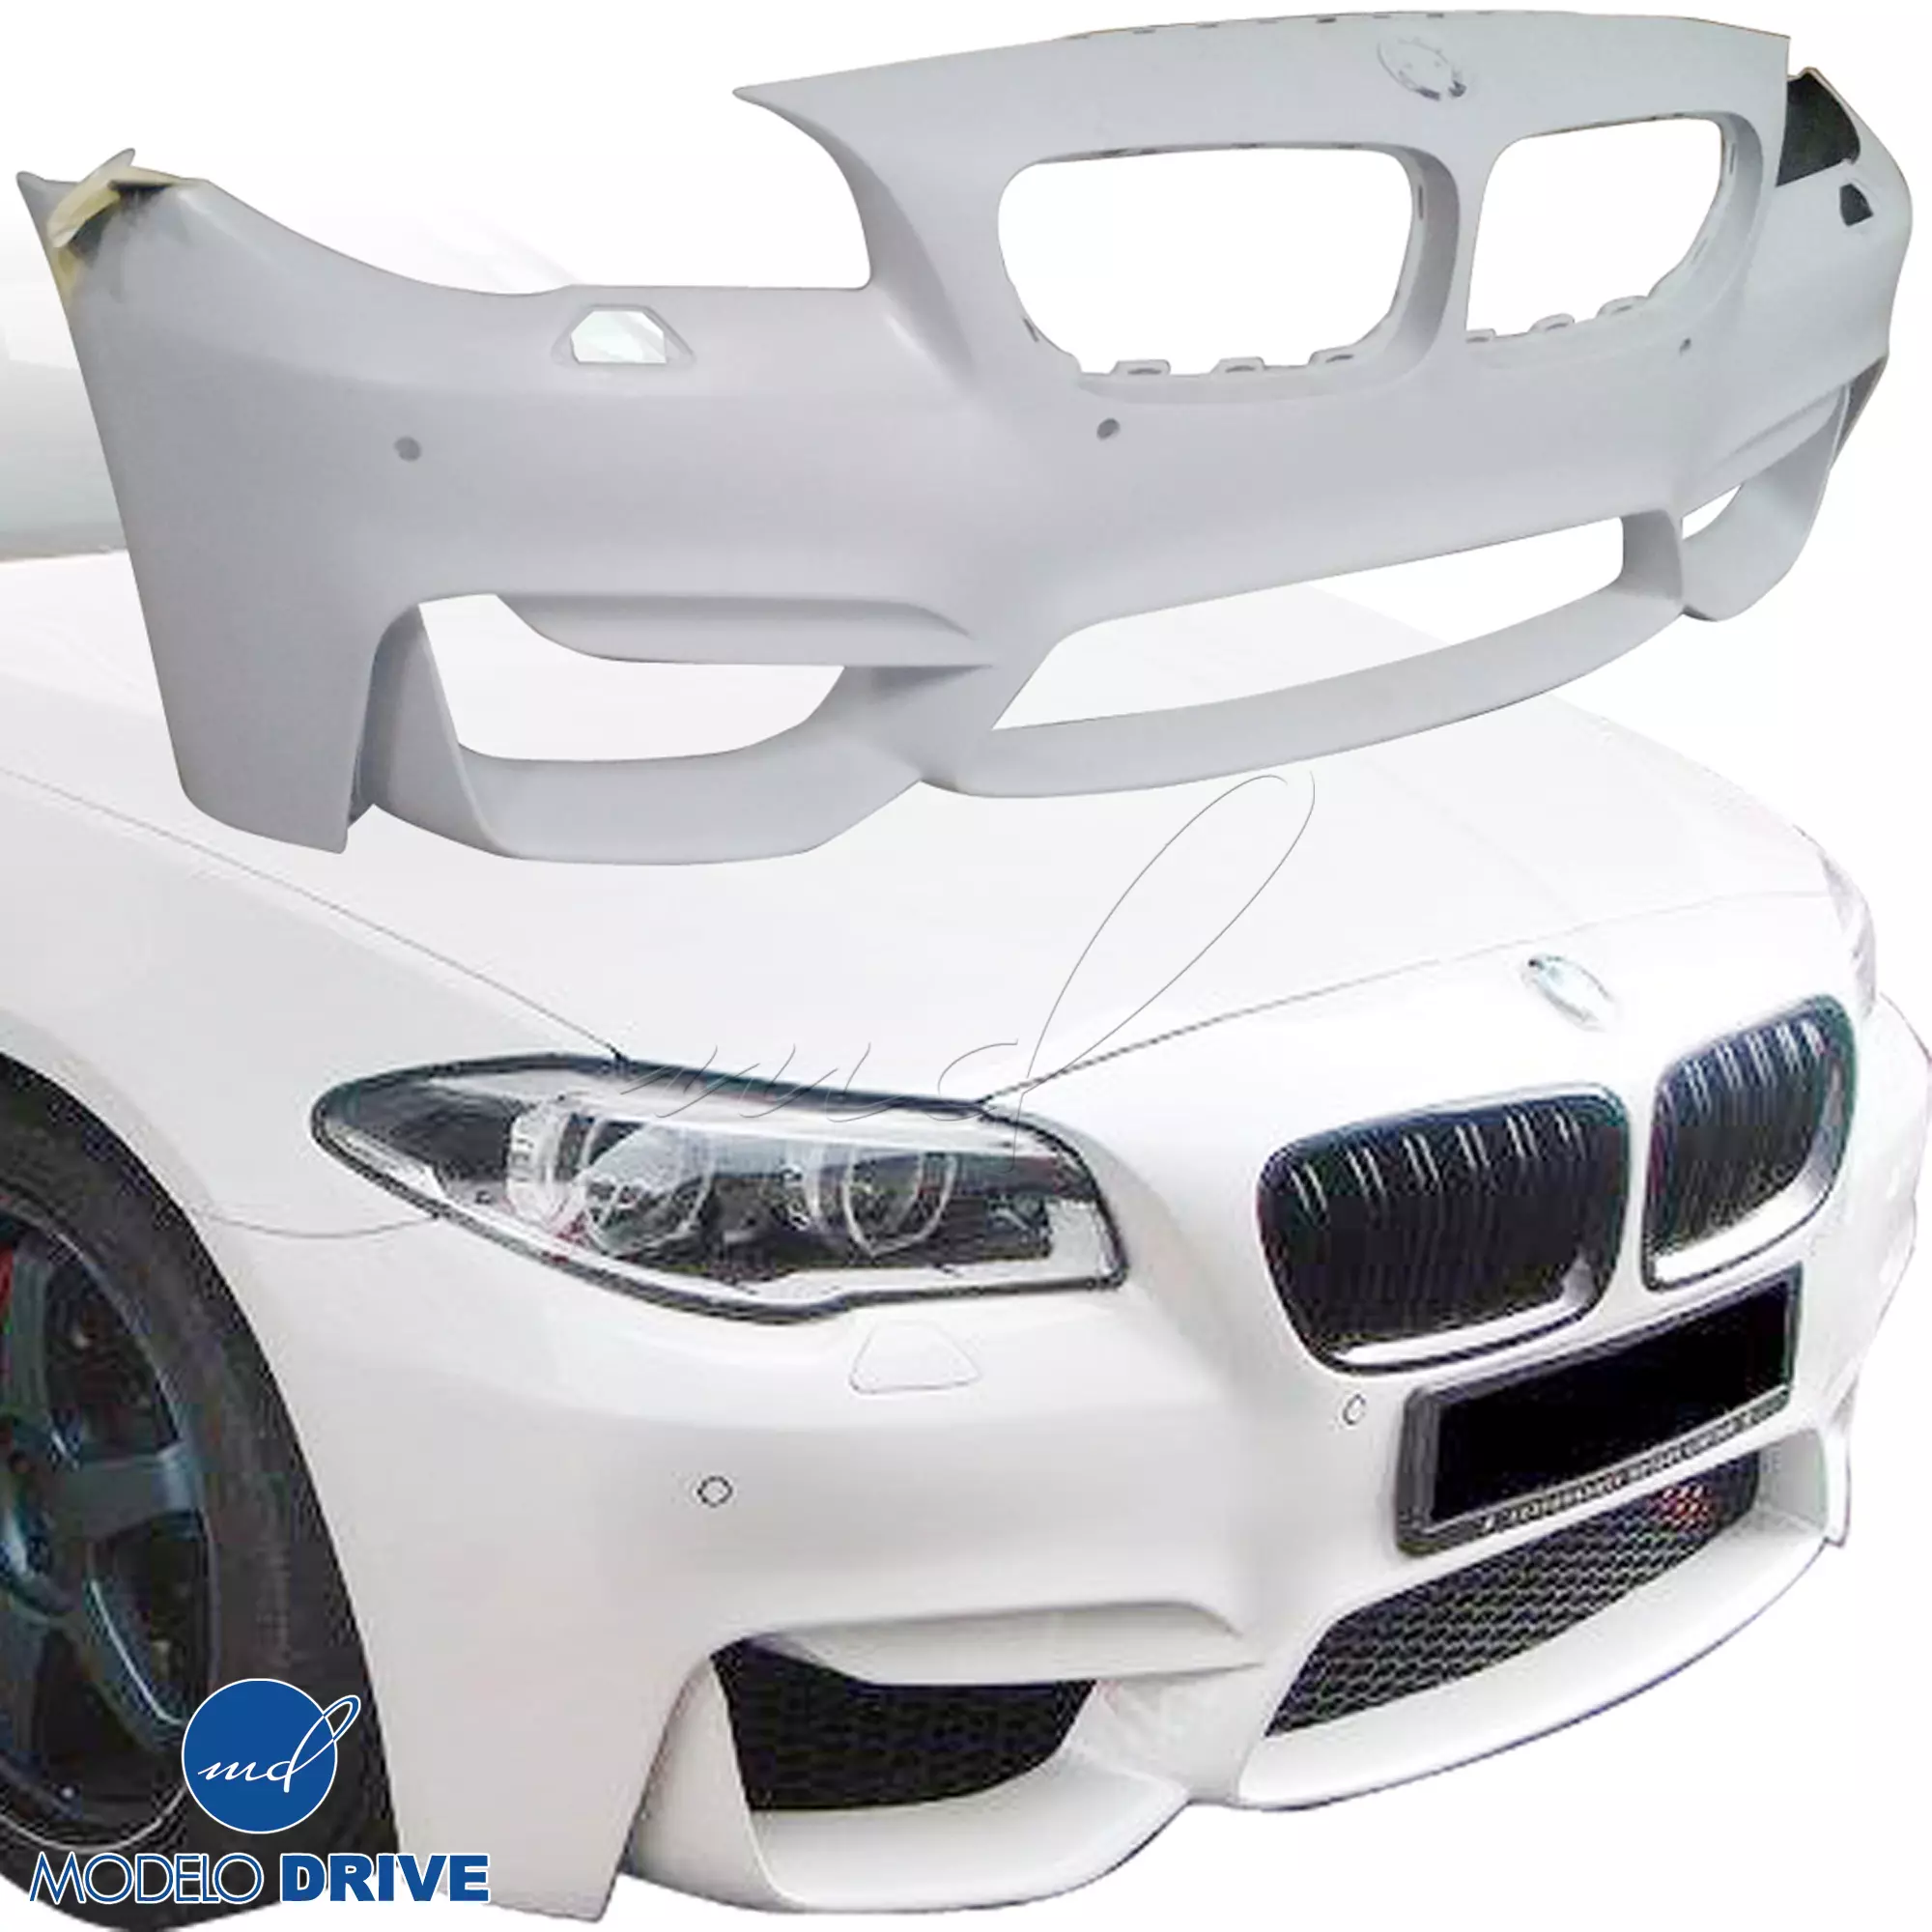 ModeloDrive FRP Type-M4 Style Front Bumper and Lip 2pc > BMW 5-Series F10 2011-2016 > 4dr - Image 8